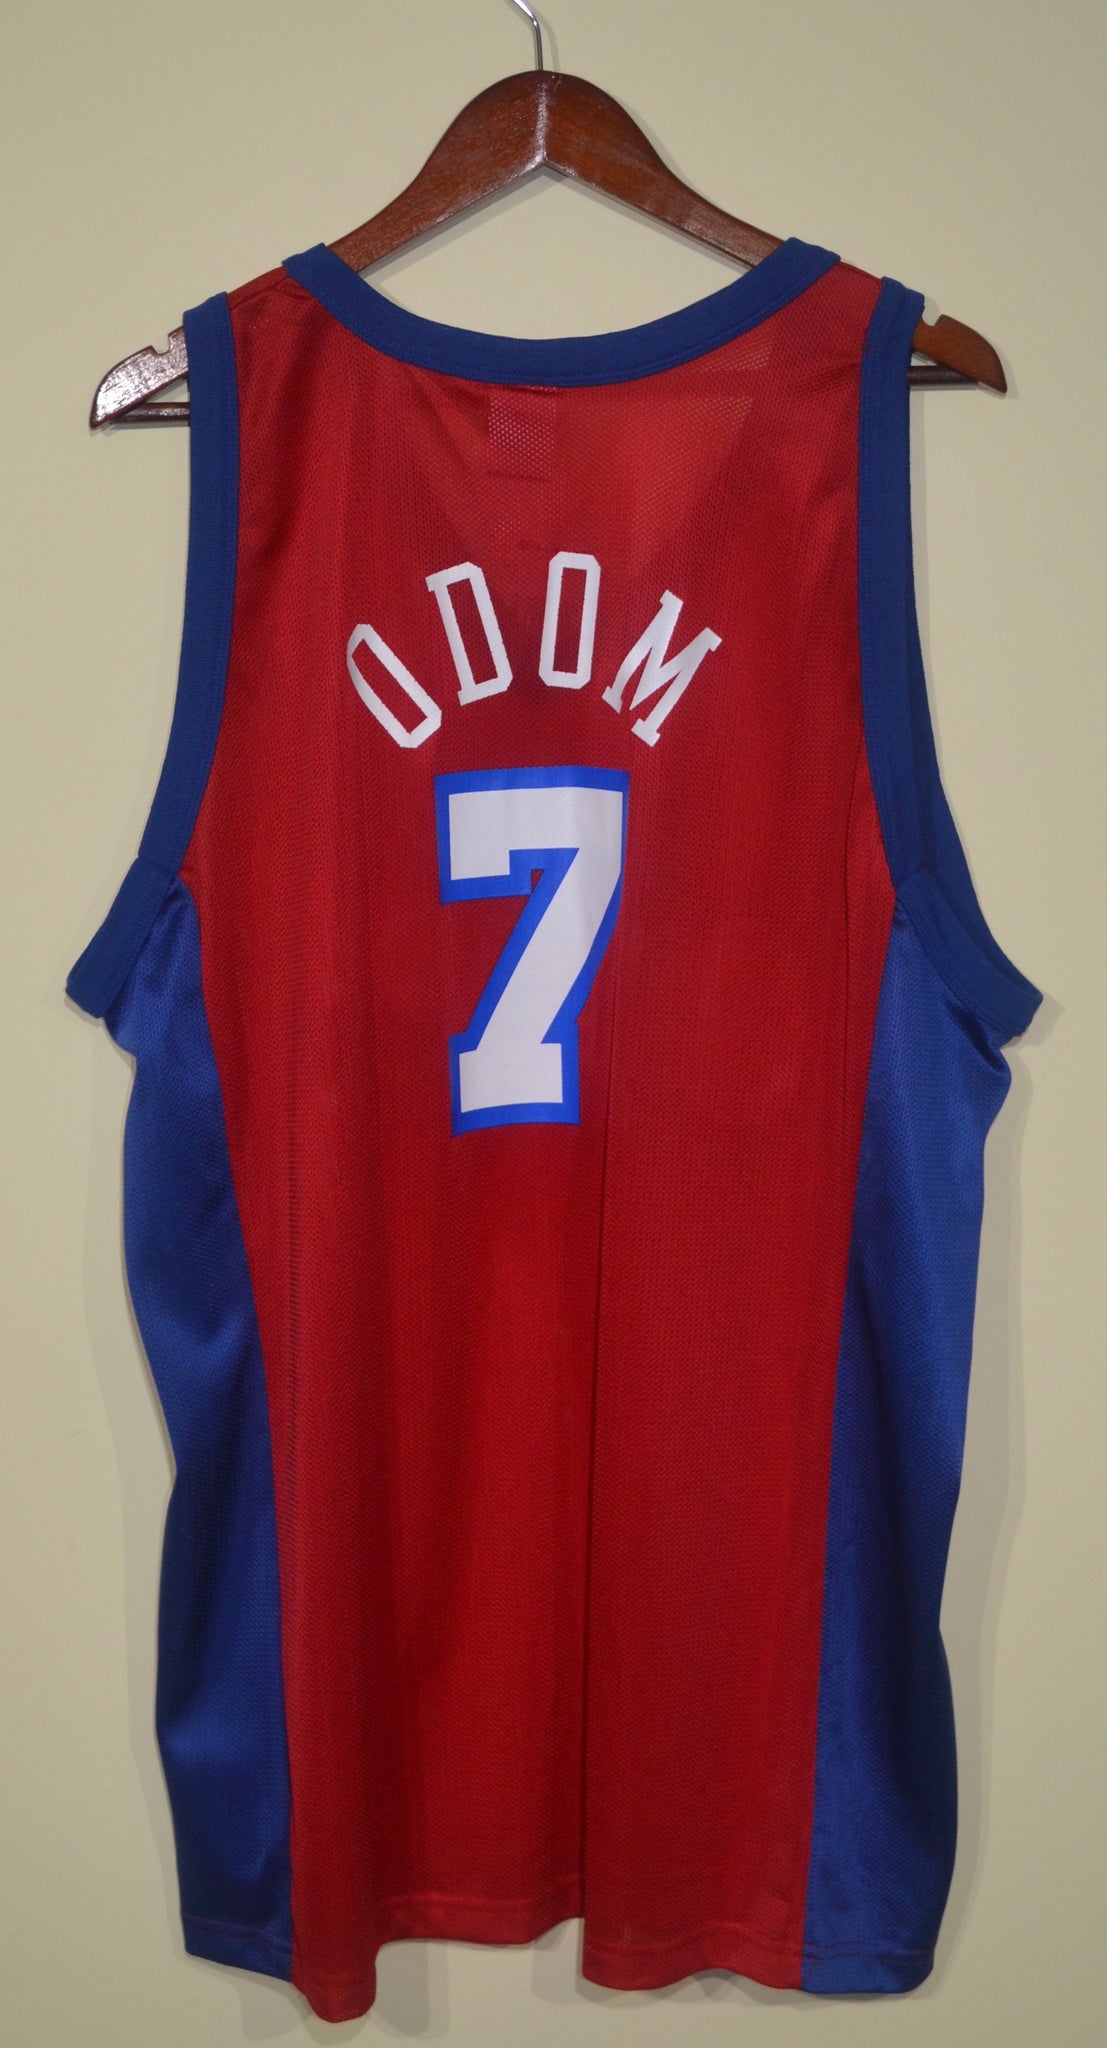 Lamar Odom Signed Los Angeles Clippers Jersey (JSA COA) #4 Overall